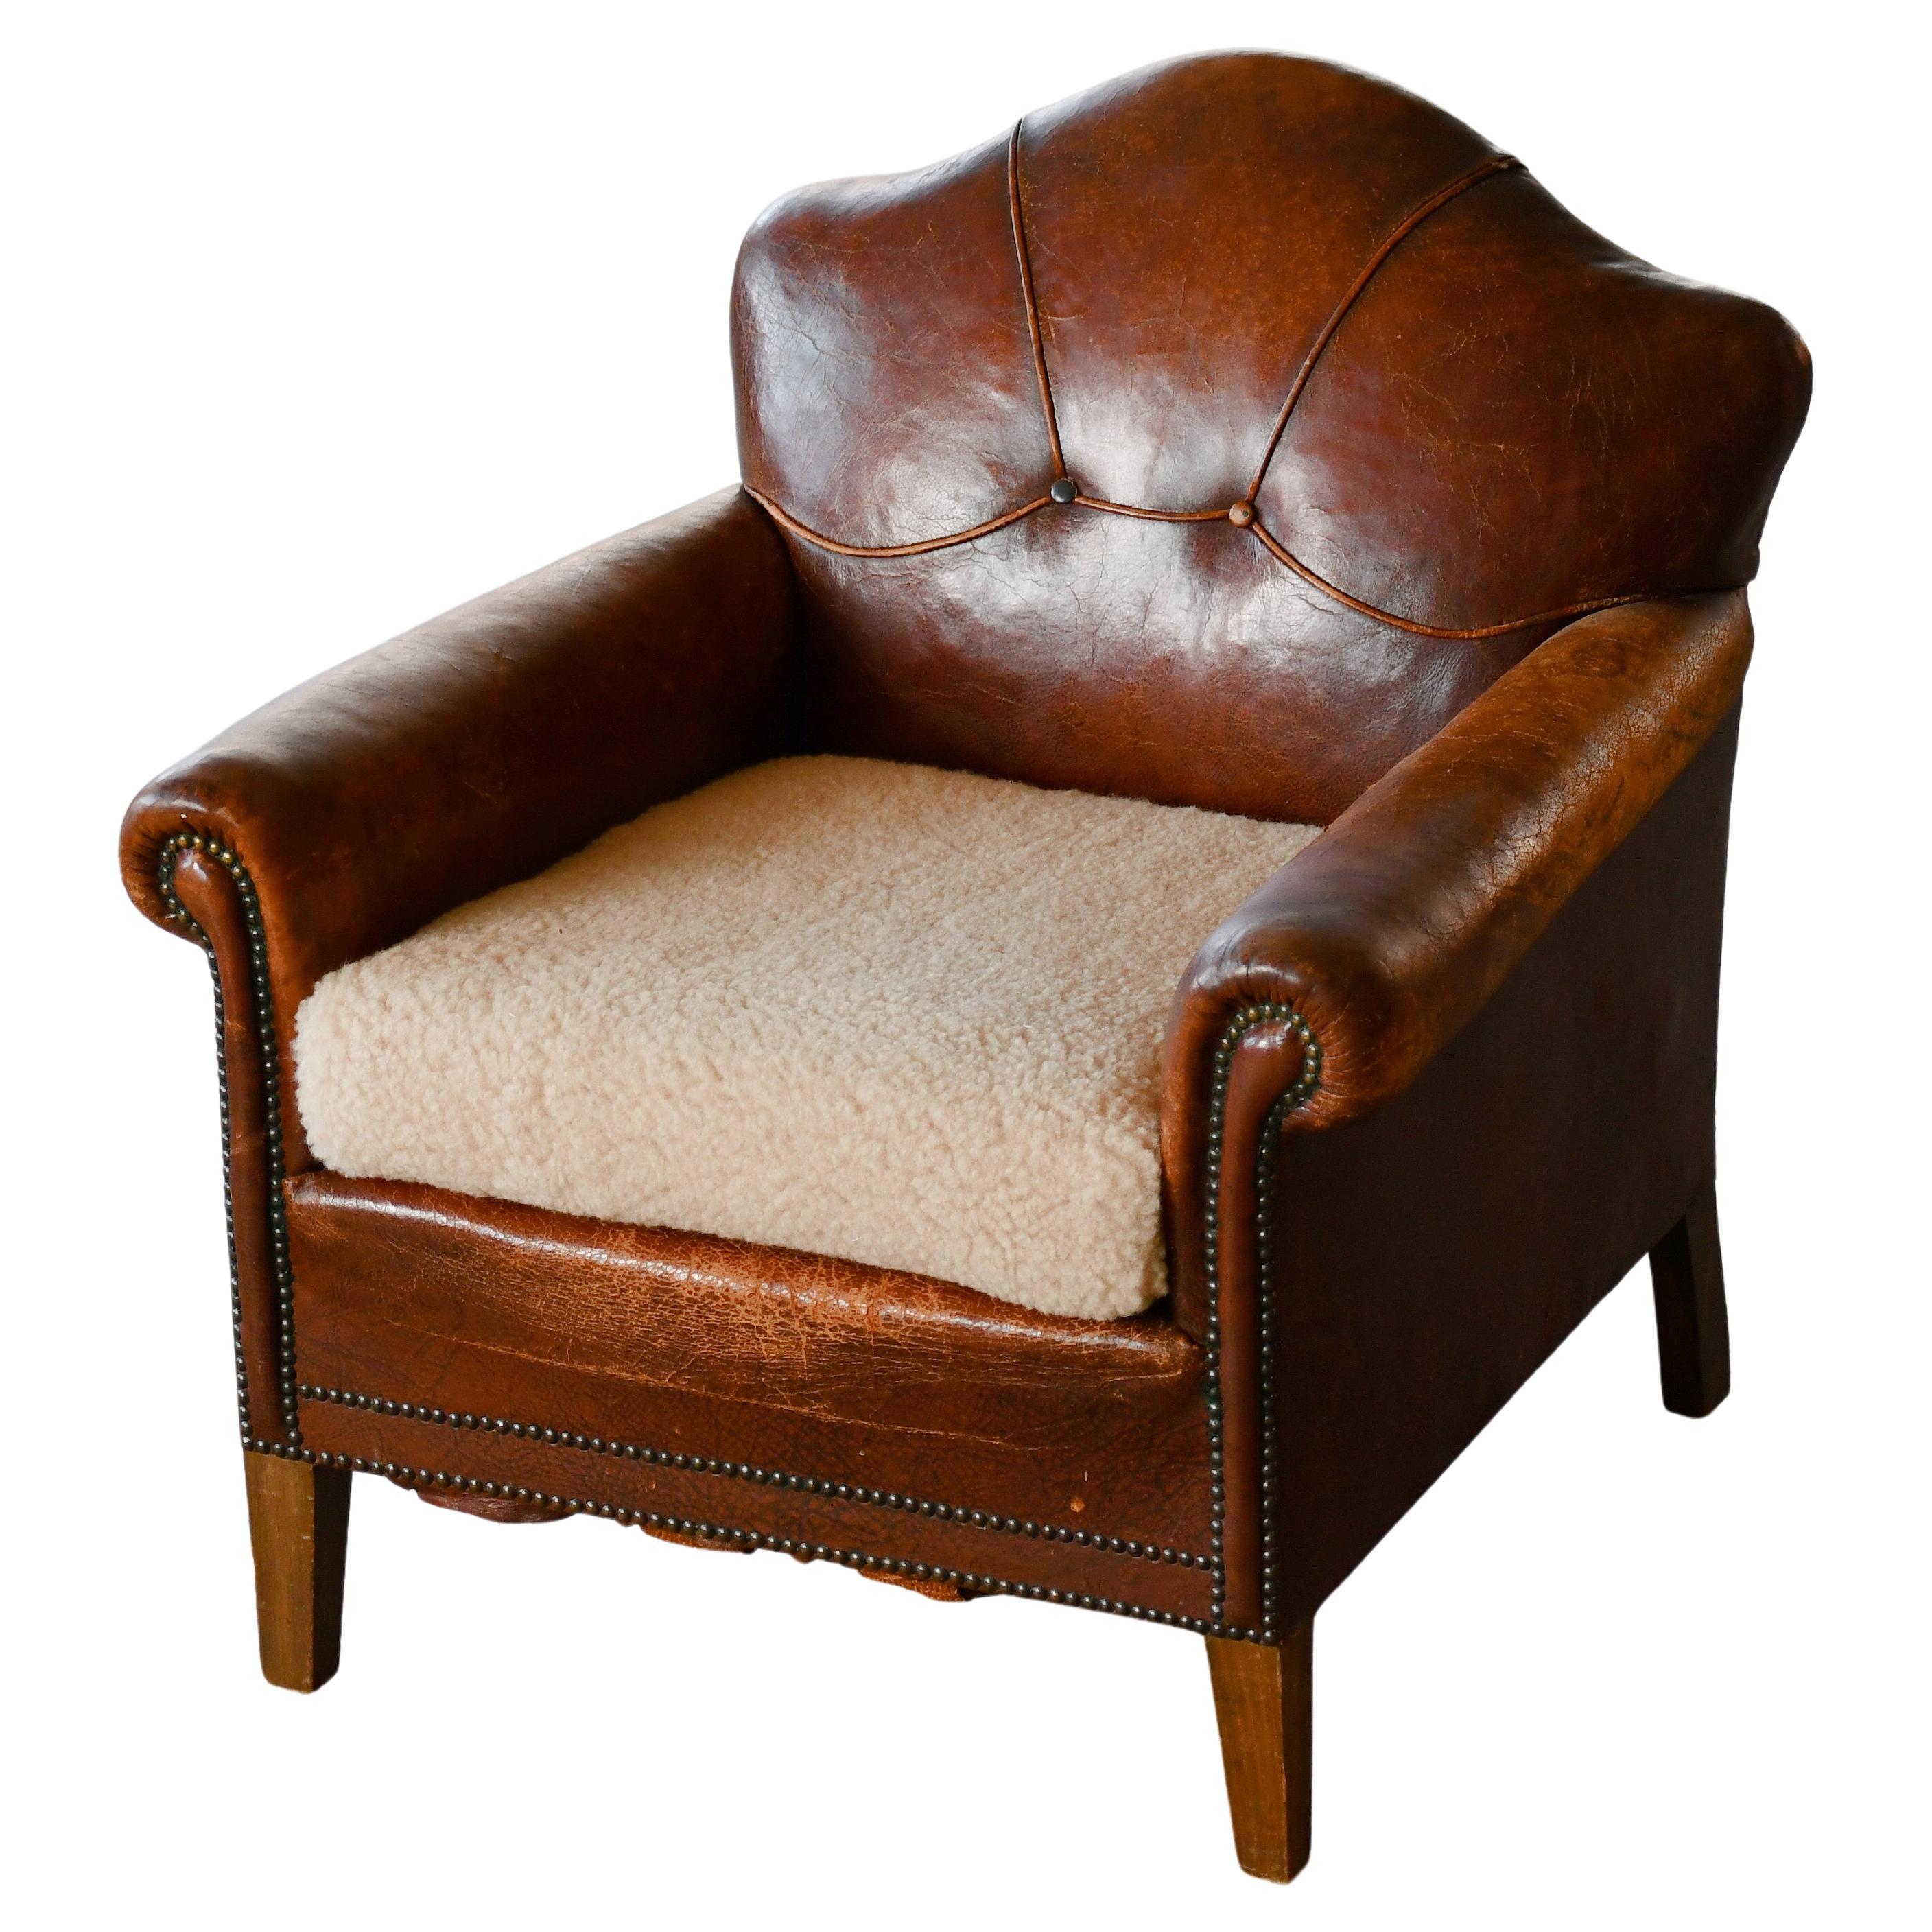 1940s Danish Small Club or Library Chair in Brown Leather For Sale